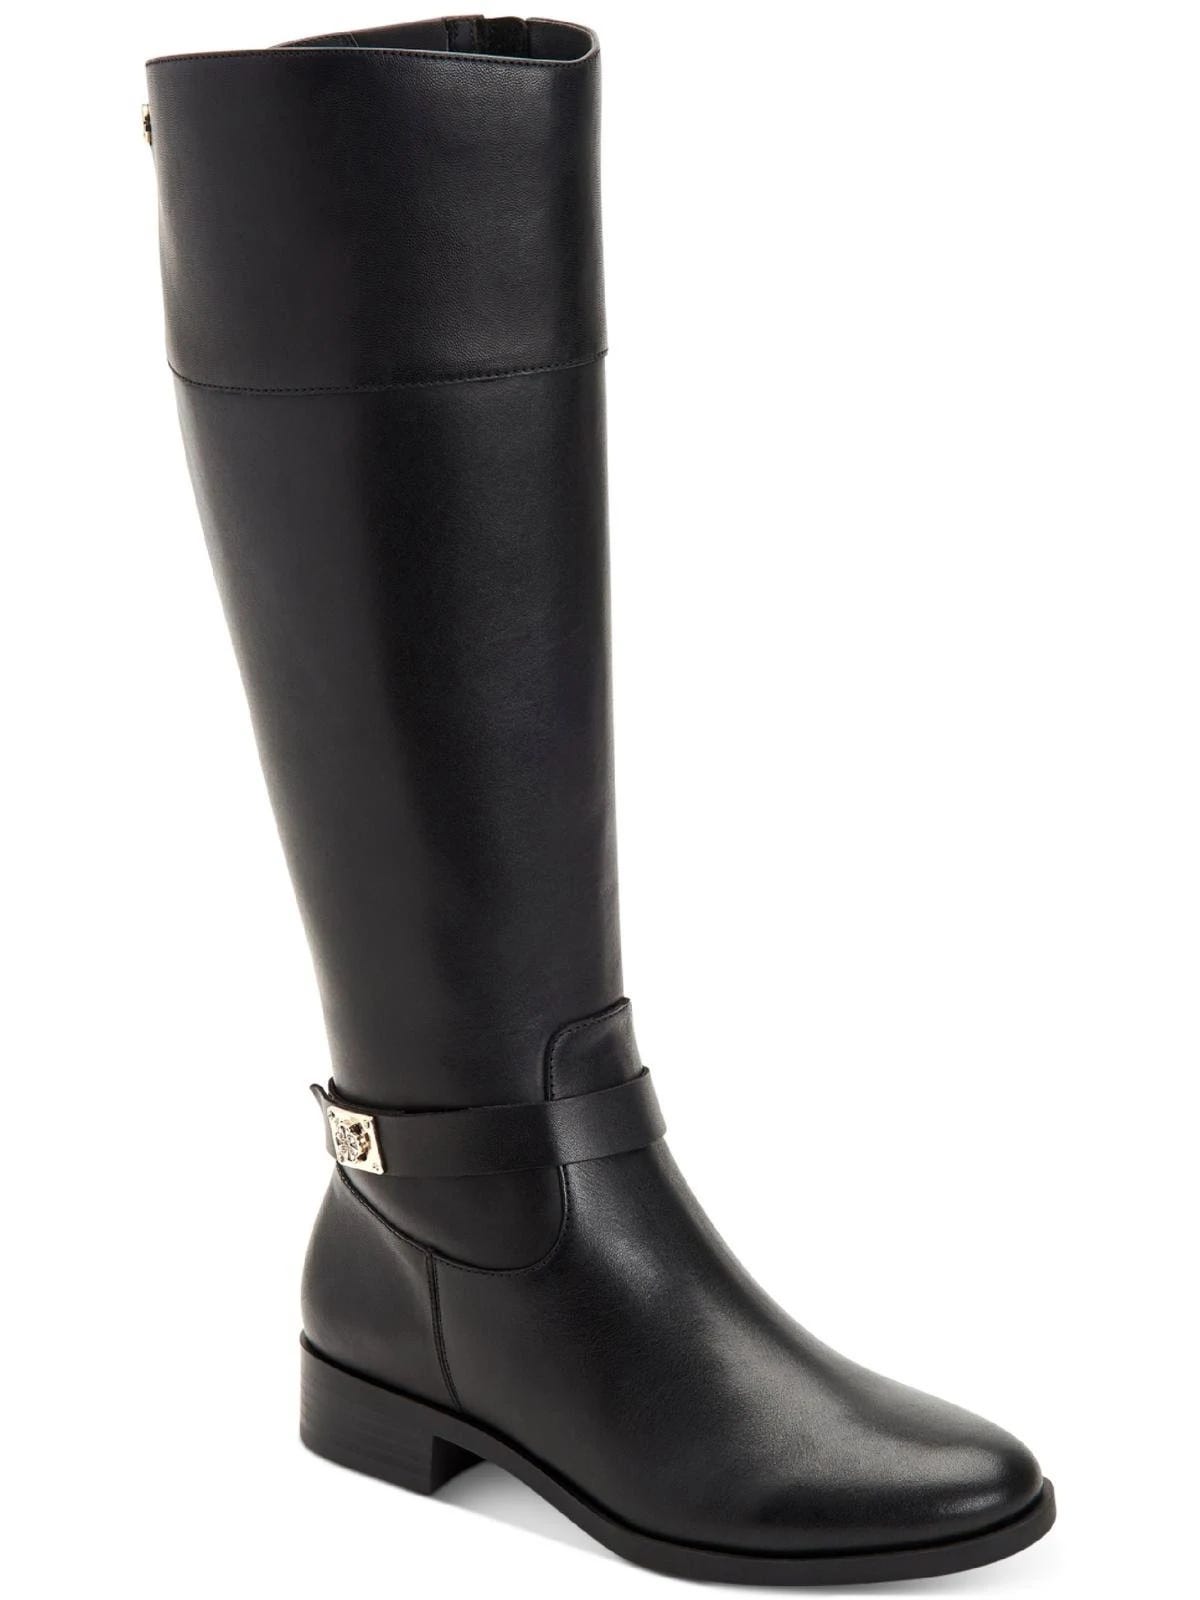 Affordable black Charter Club knee-high boots | Image